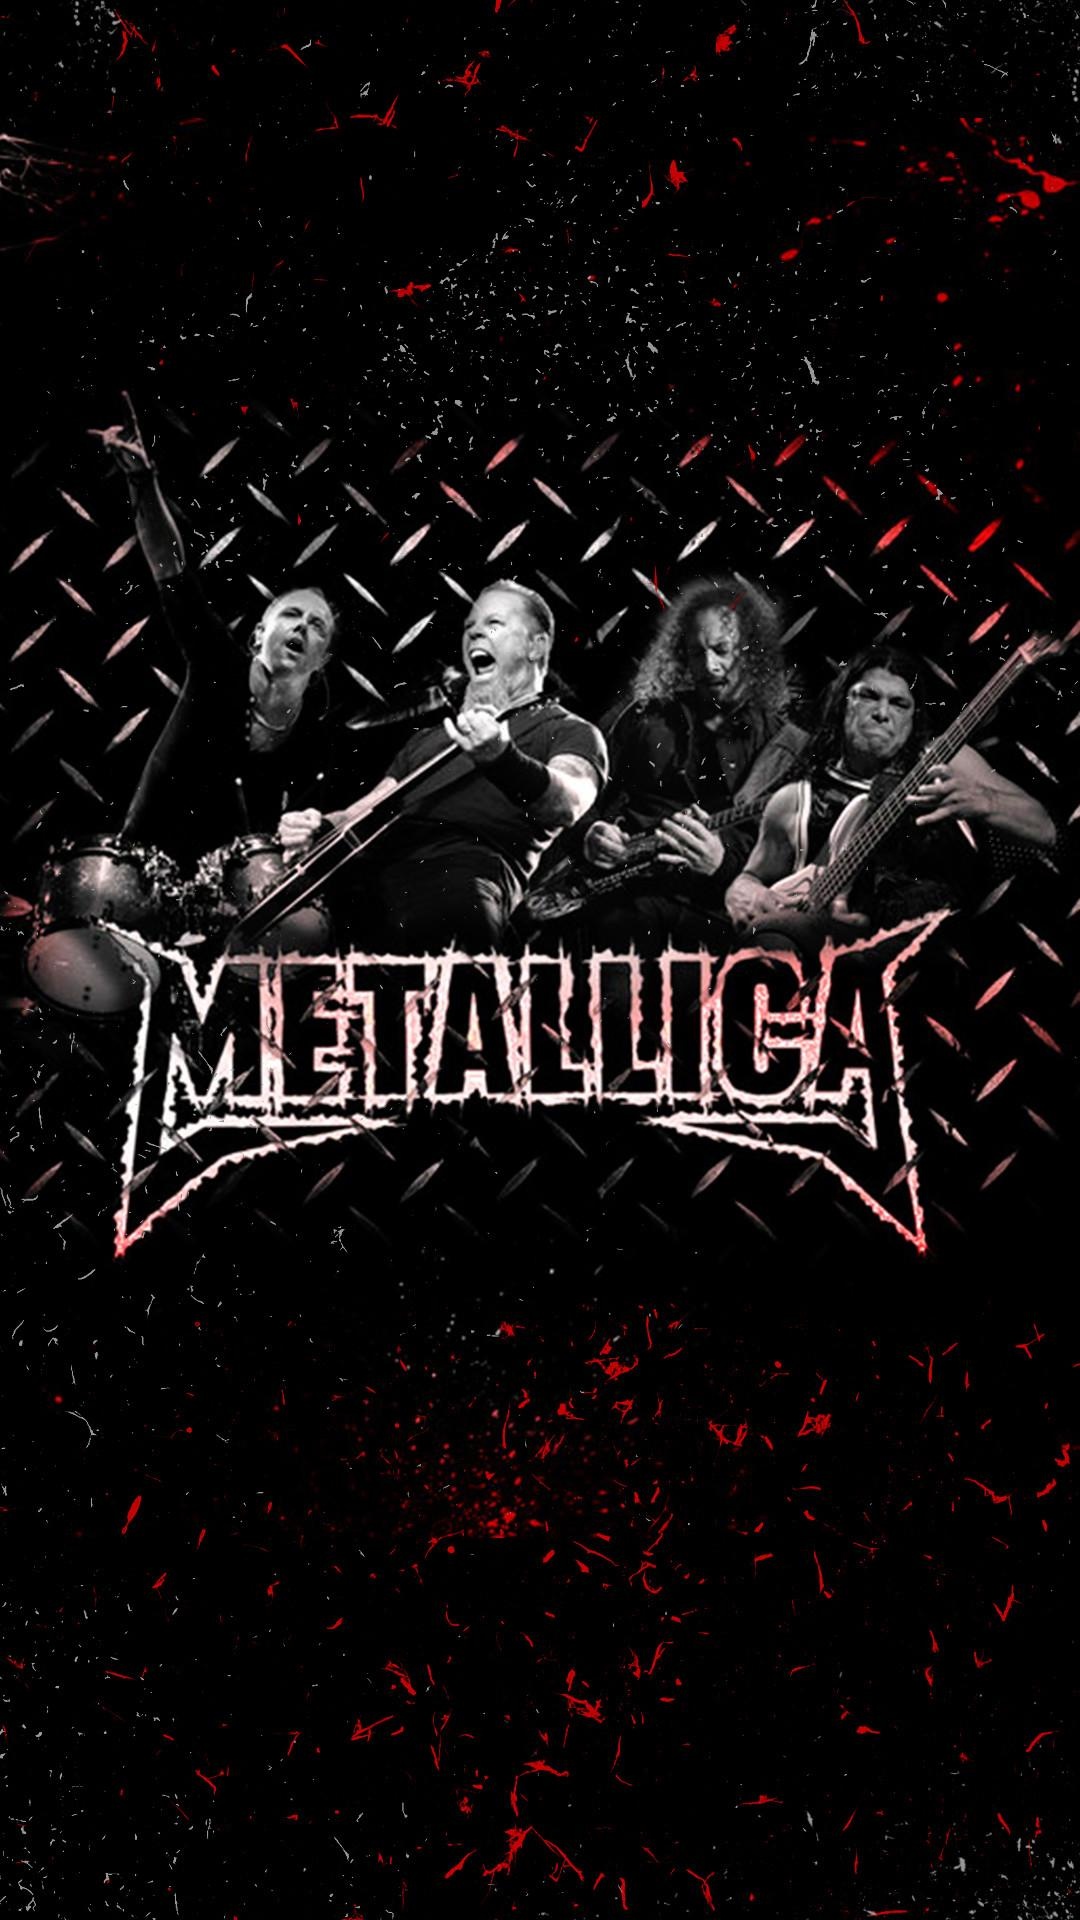 James Hetfield, Metallica Android wallpapers, Top backgrounds, Music, 1080x1920 Full HD Phone